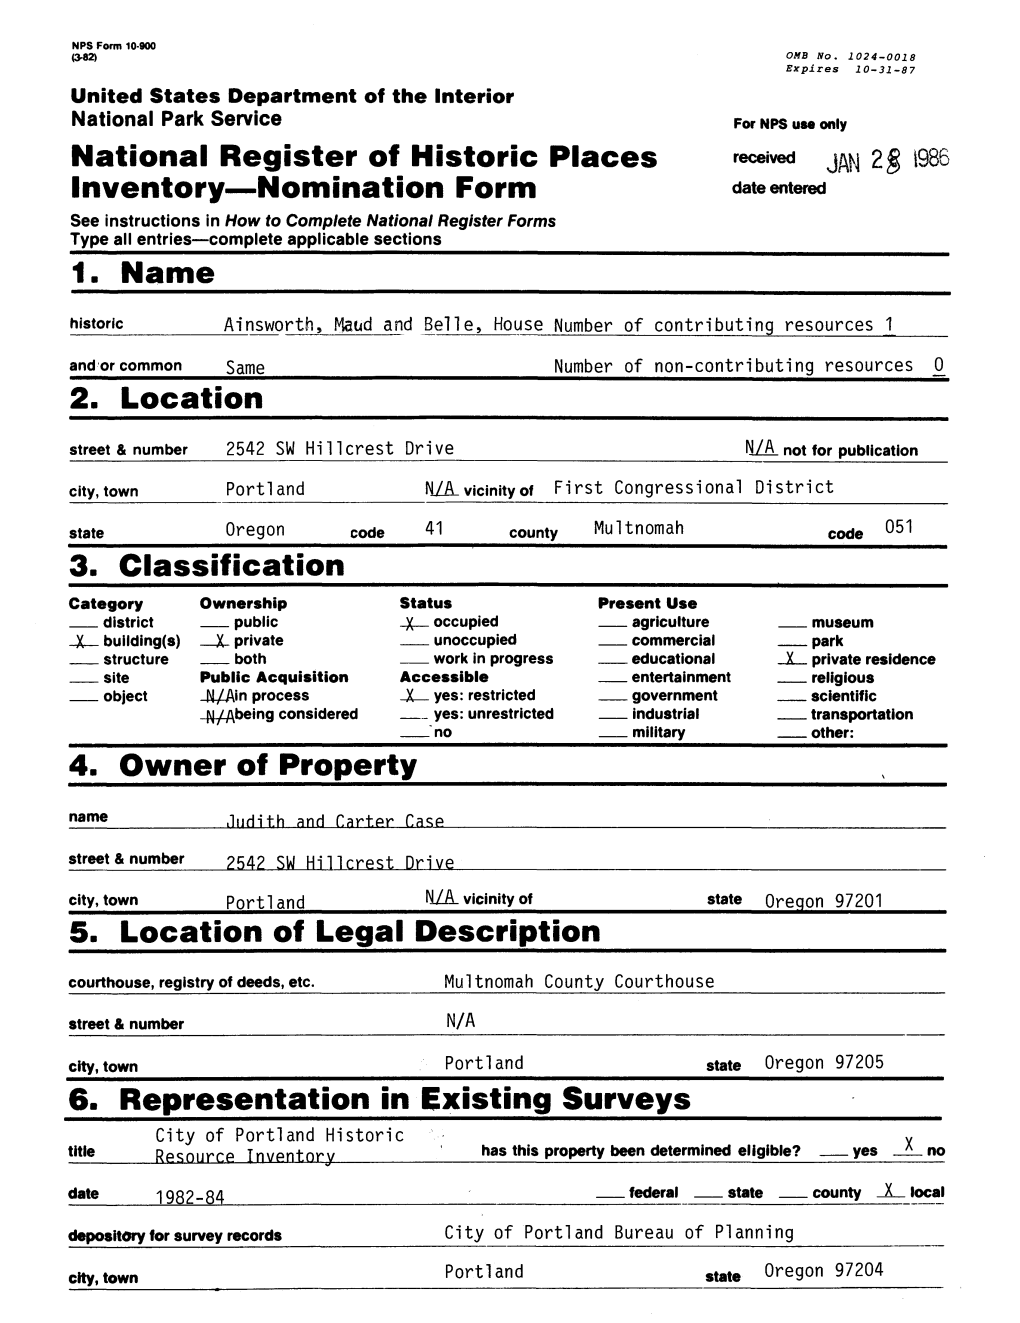 3. Classification 4. Owner Off Property 6. Representation